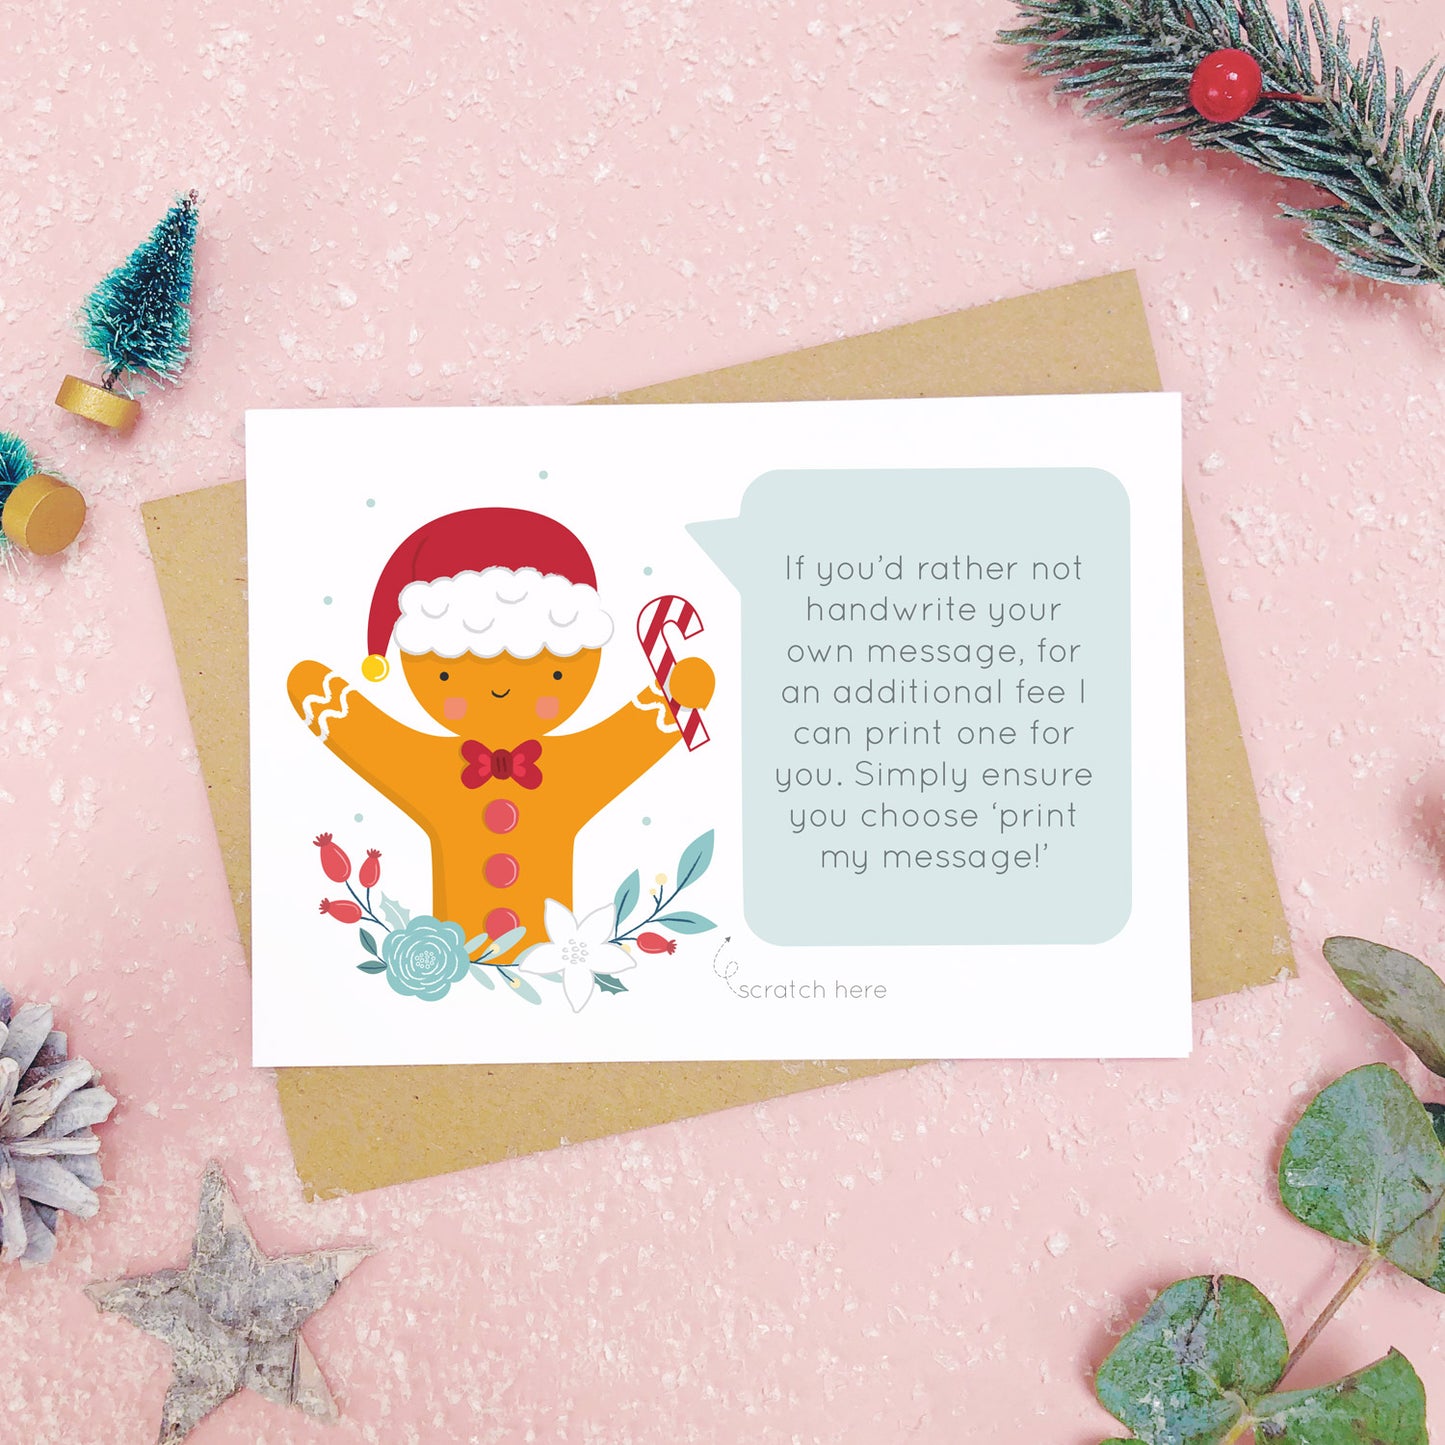 A personalised gingerbread man scratch card an example of the printed message. Shot on a pink background with grey and green festive props.